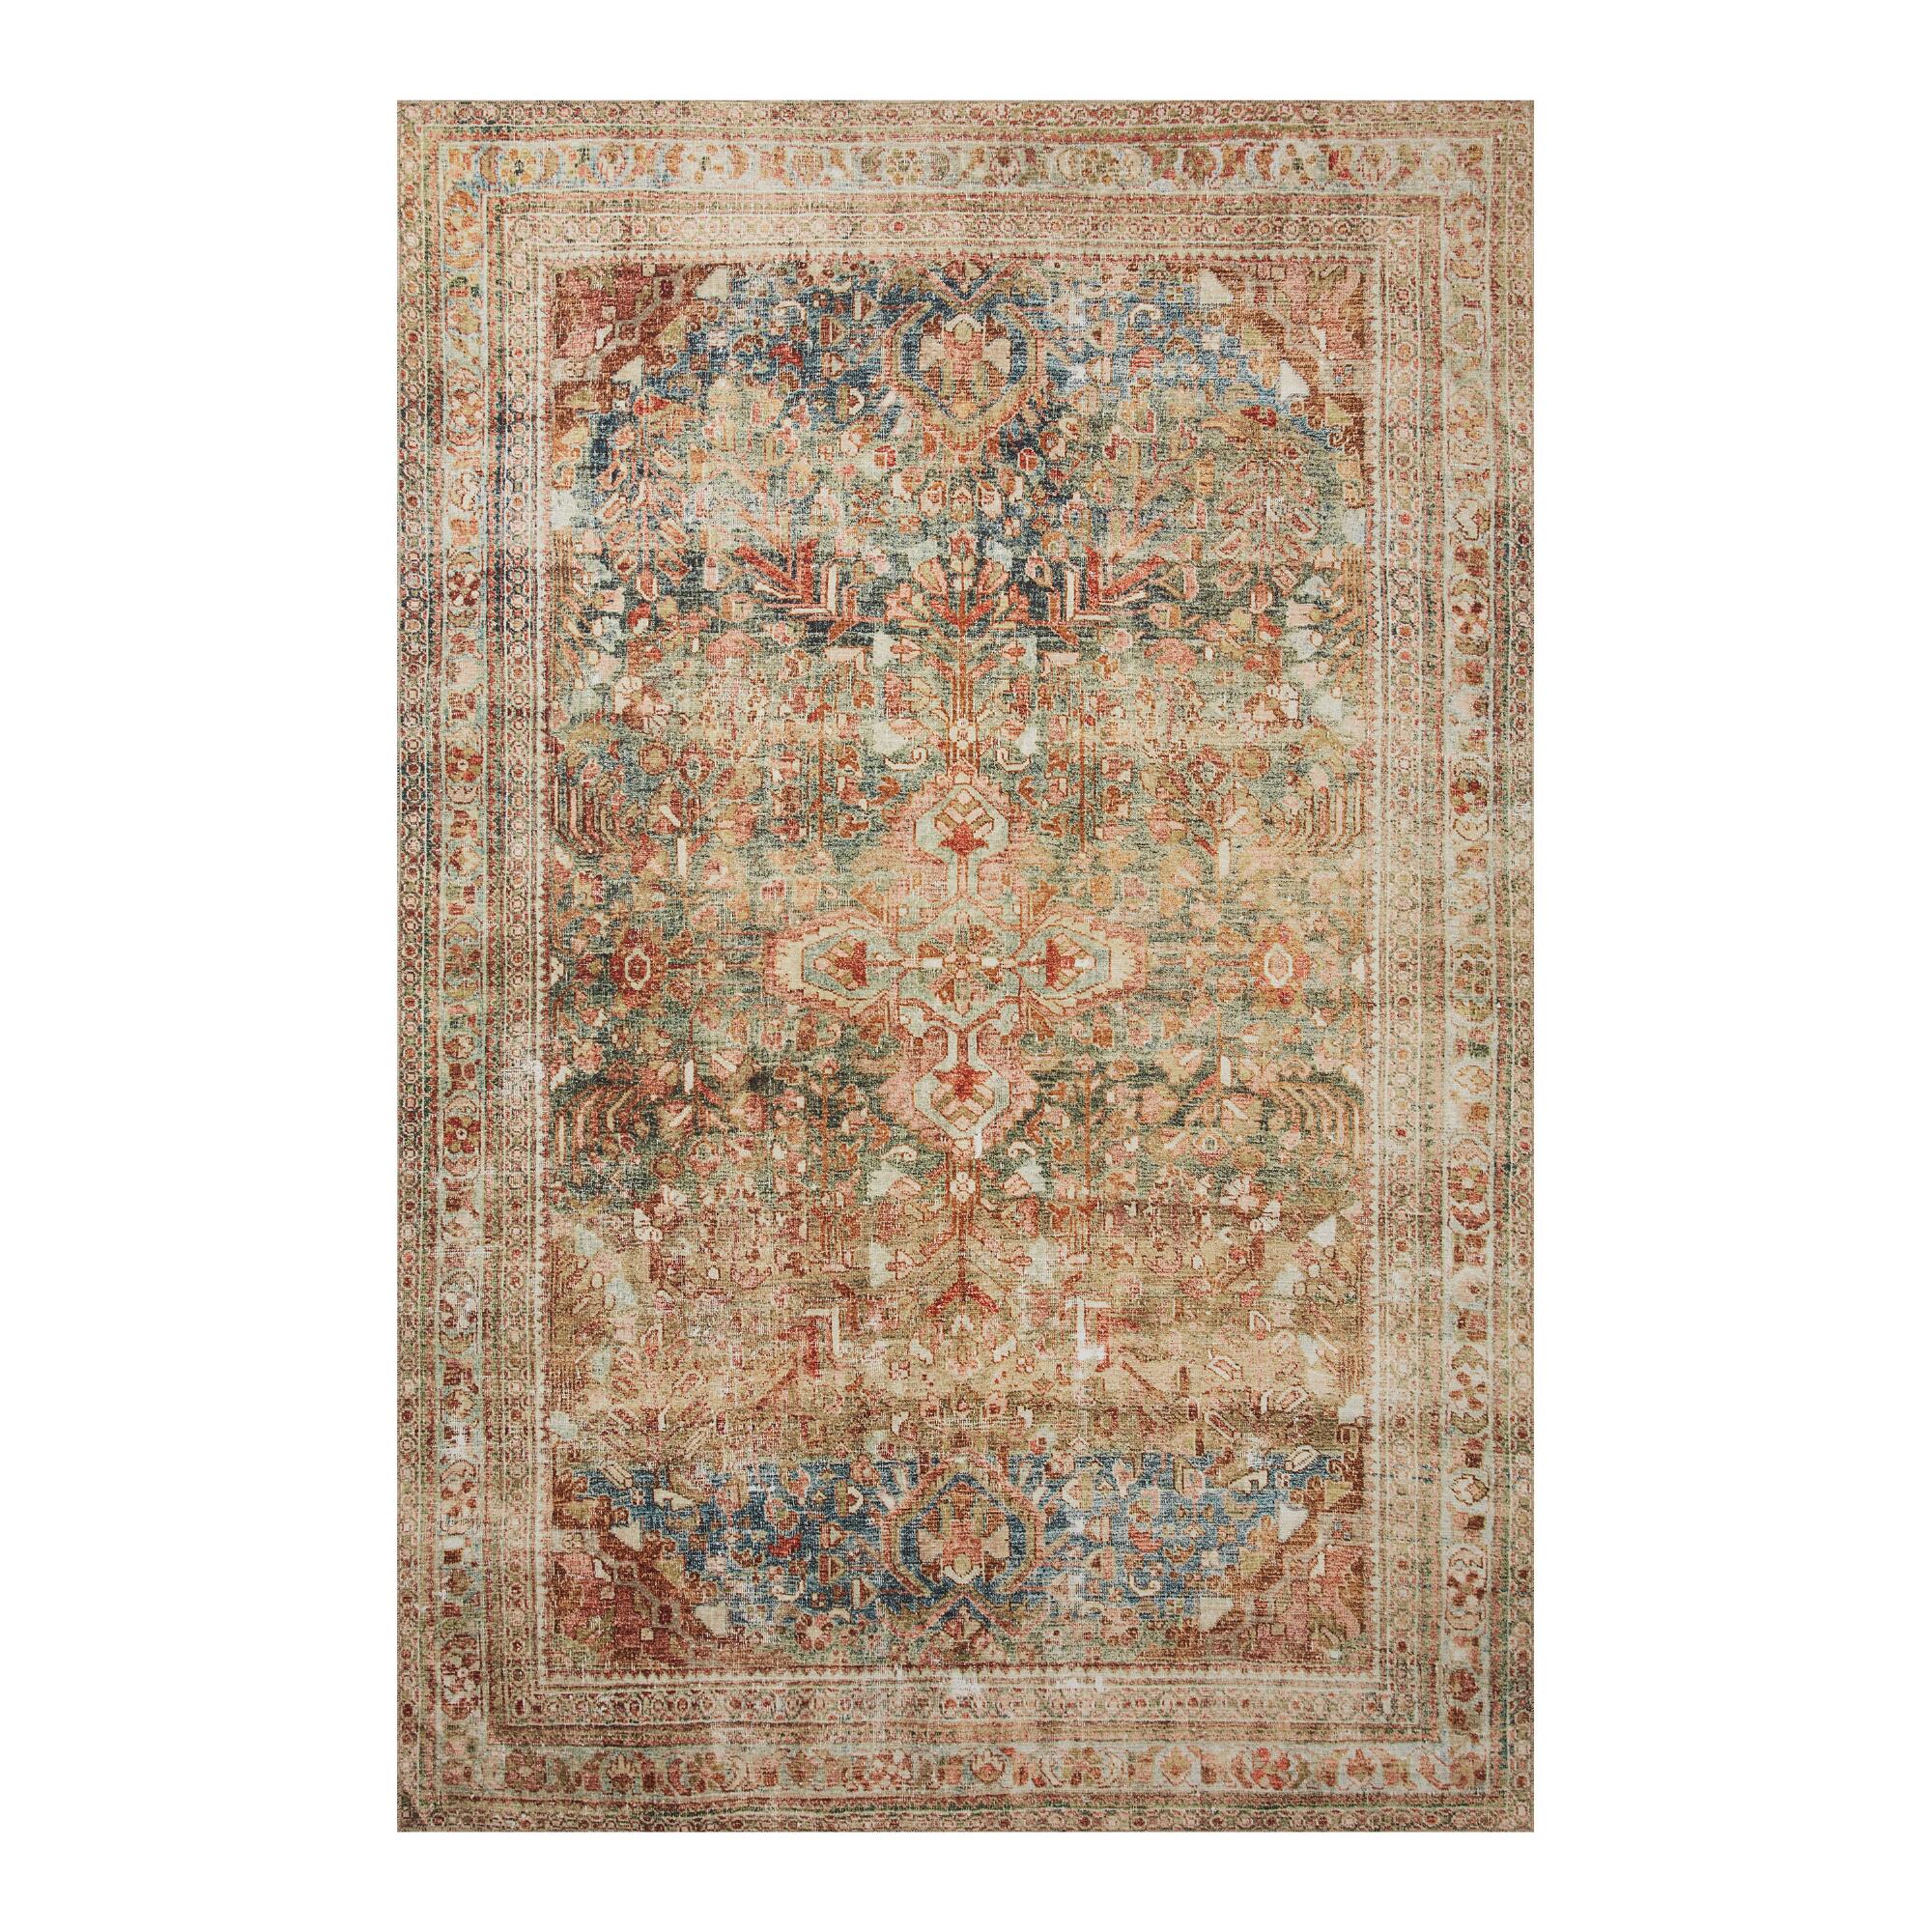 Green Distressed Persian Style Zelda Area Rug: Multi - Polyester - 8' x 10' by World Market